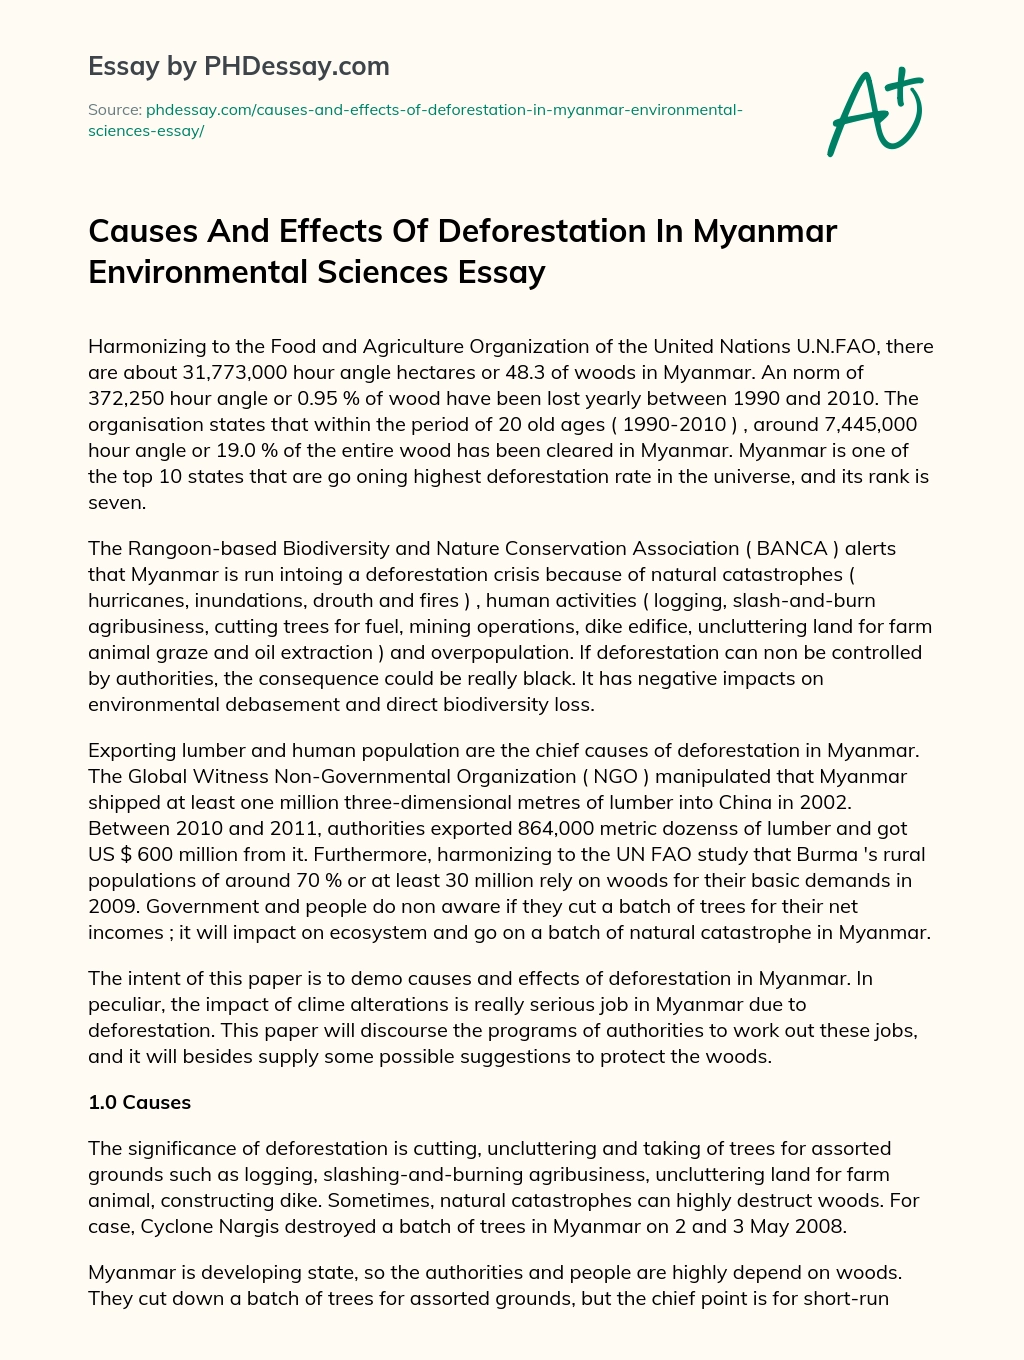 Causes and effects of deforestation in Myanmar essay